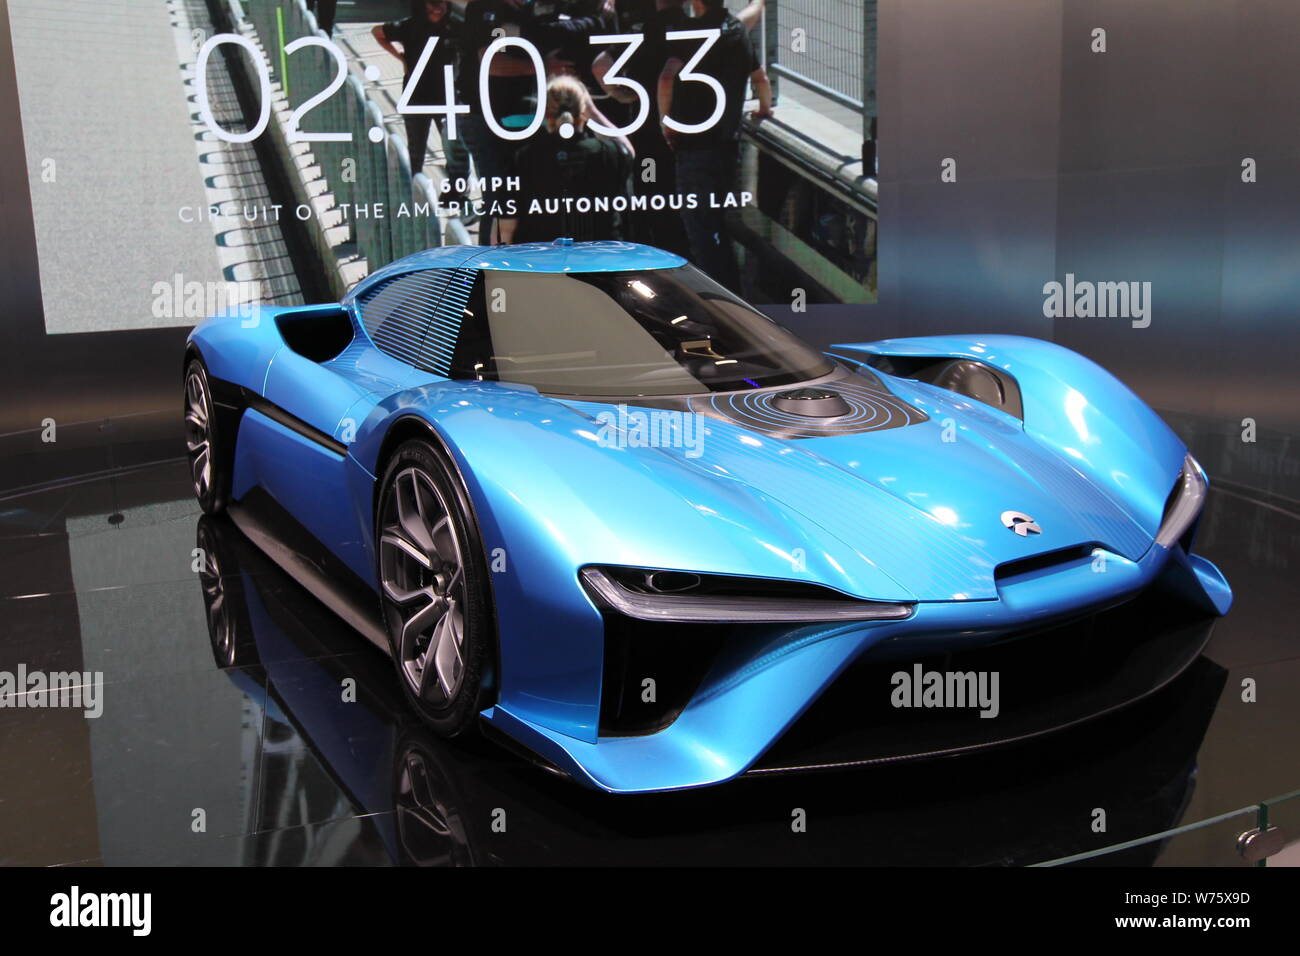 File A Nio Ep9 Nextev Sports Car Of Manufactured By Nio Assisted By Chinese Motor Racing Team Nextev Formula E Team Is On Display During An Autom Stock Photo Alamy